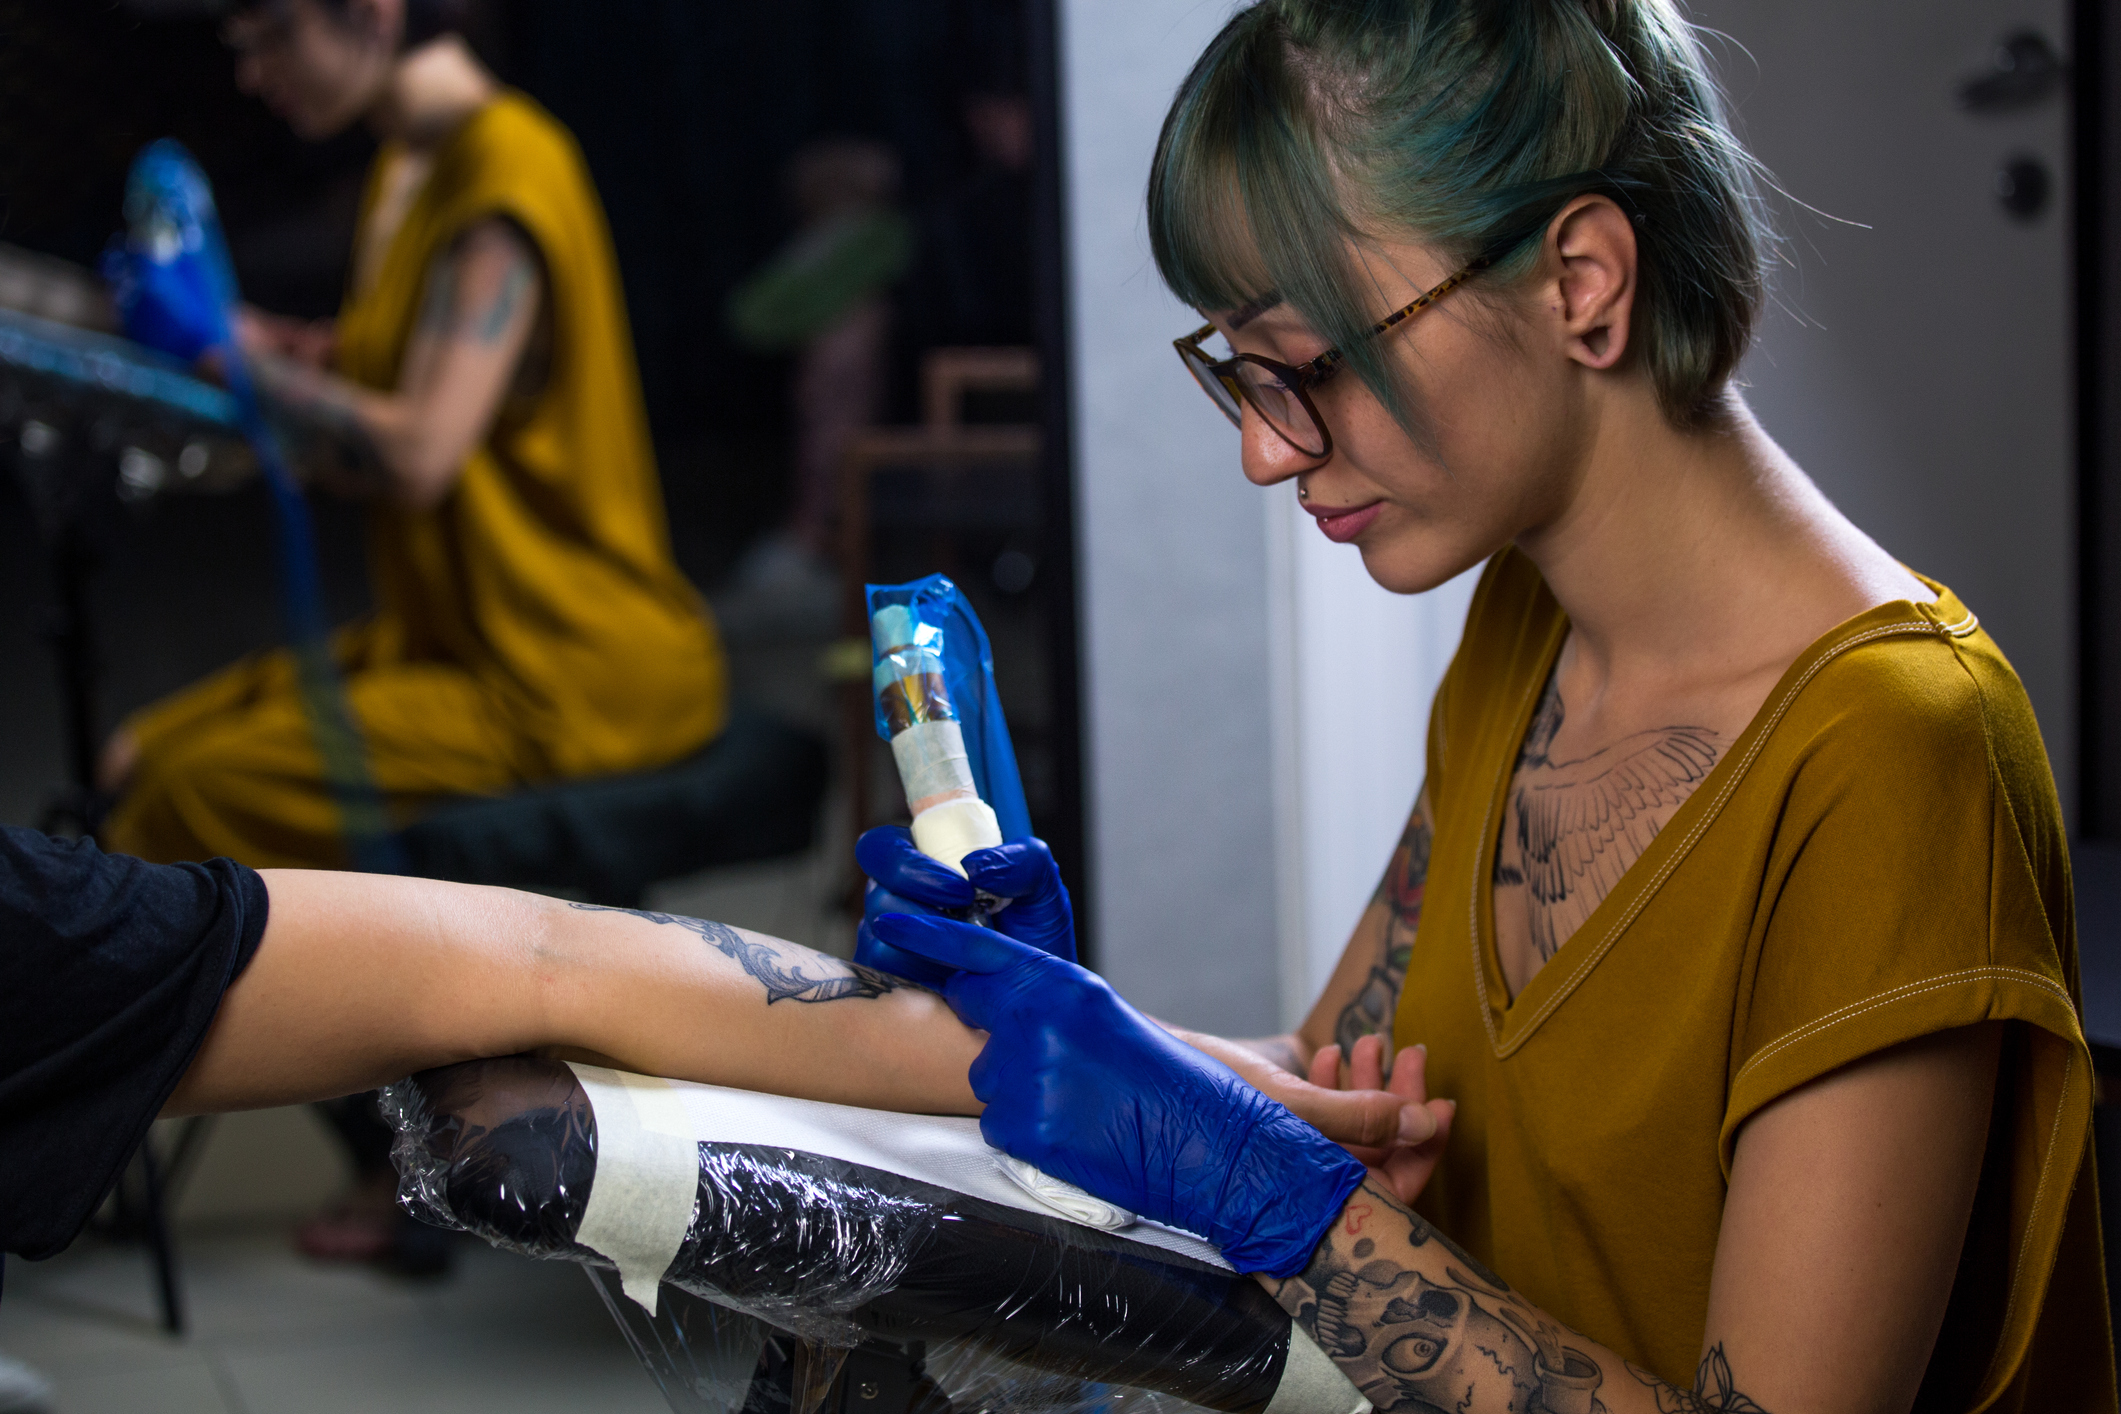 What Are Portland's Laws on Tattooing?